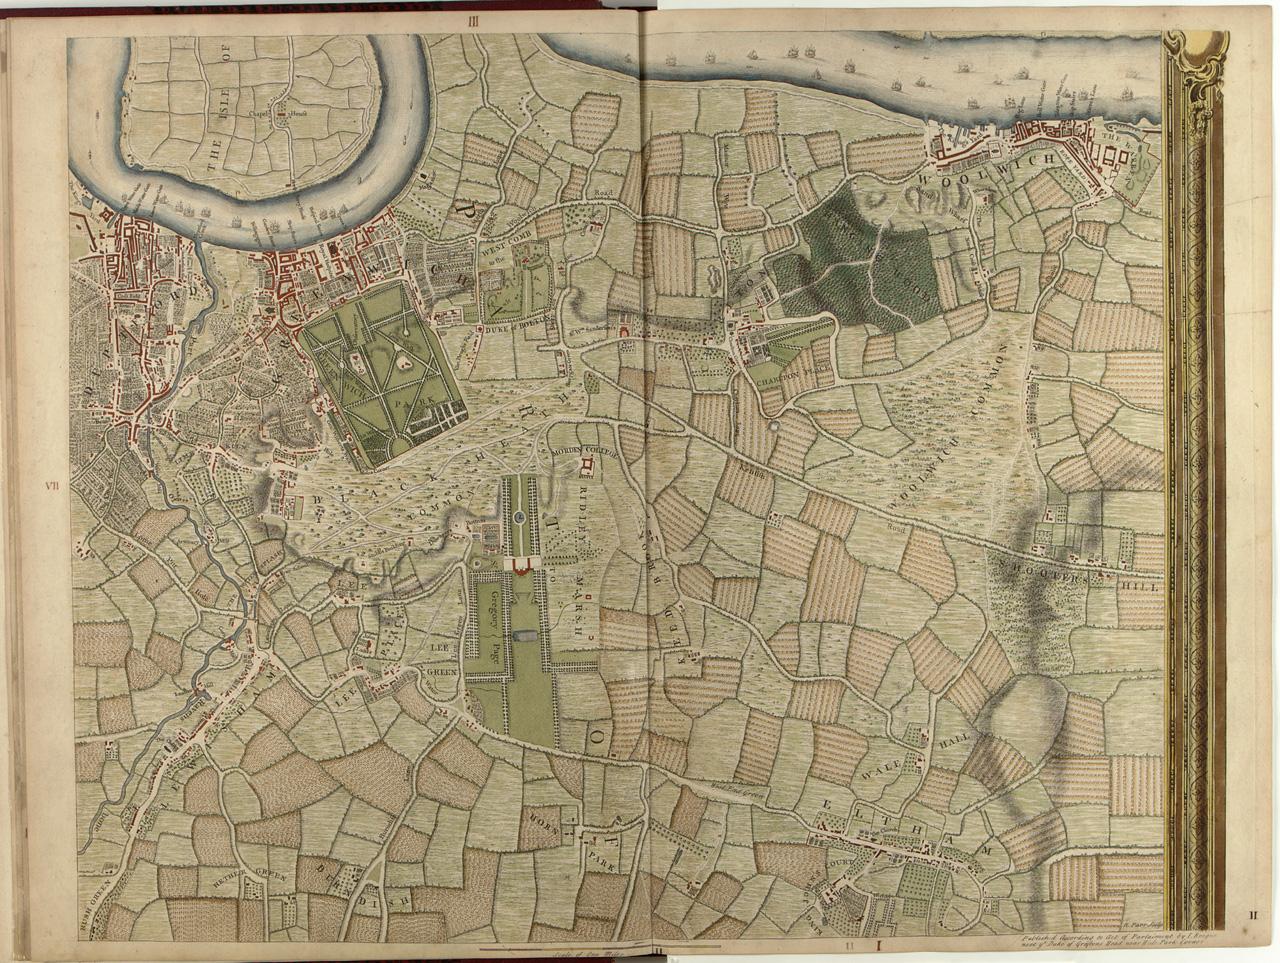 18th century map of London and Westminster